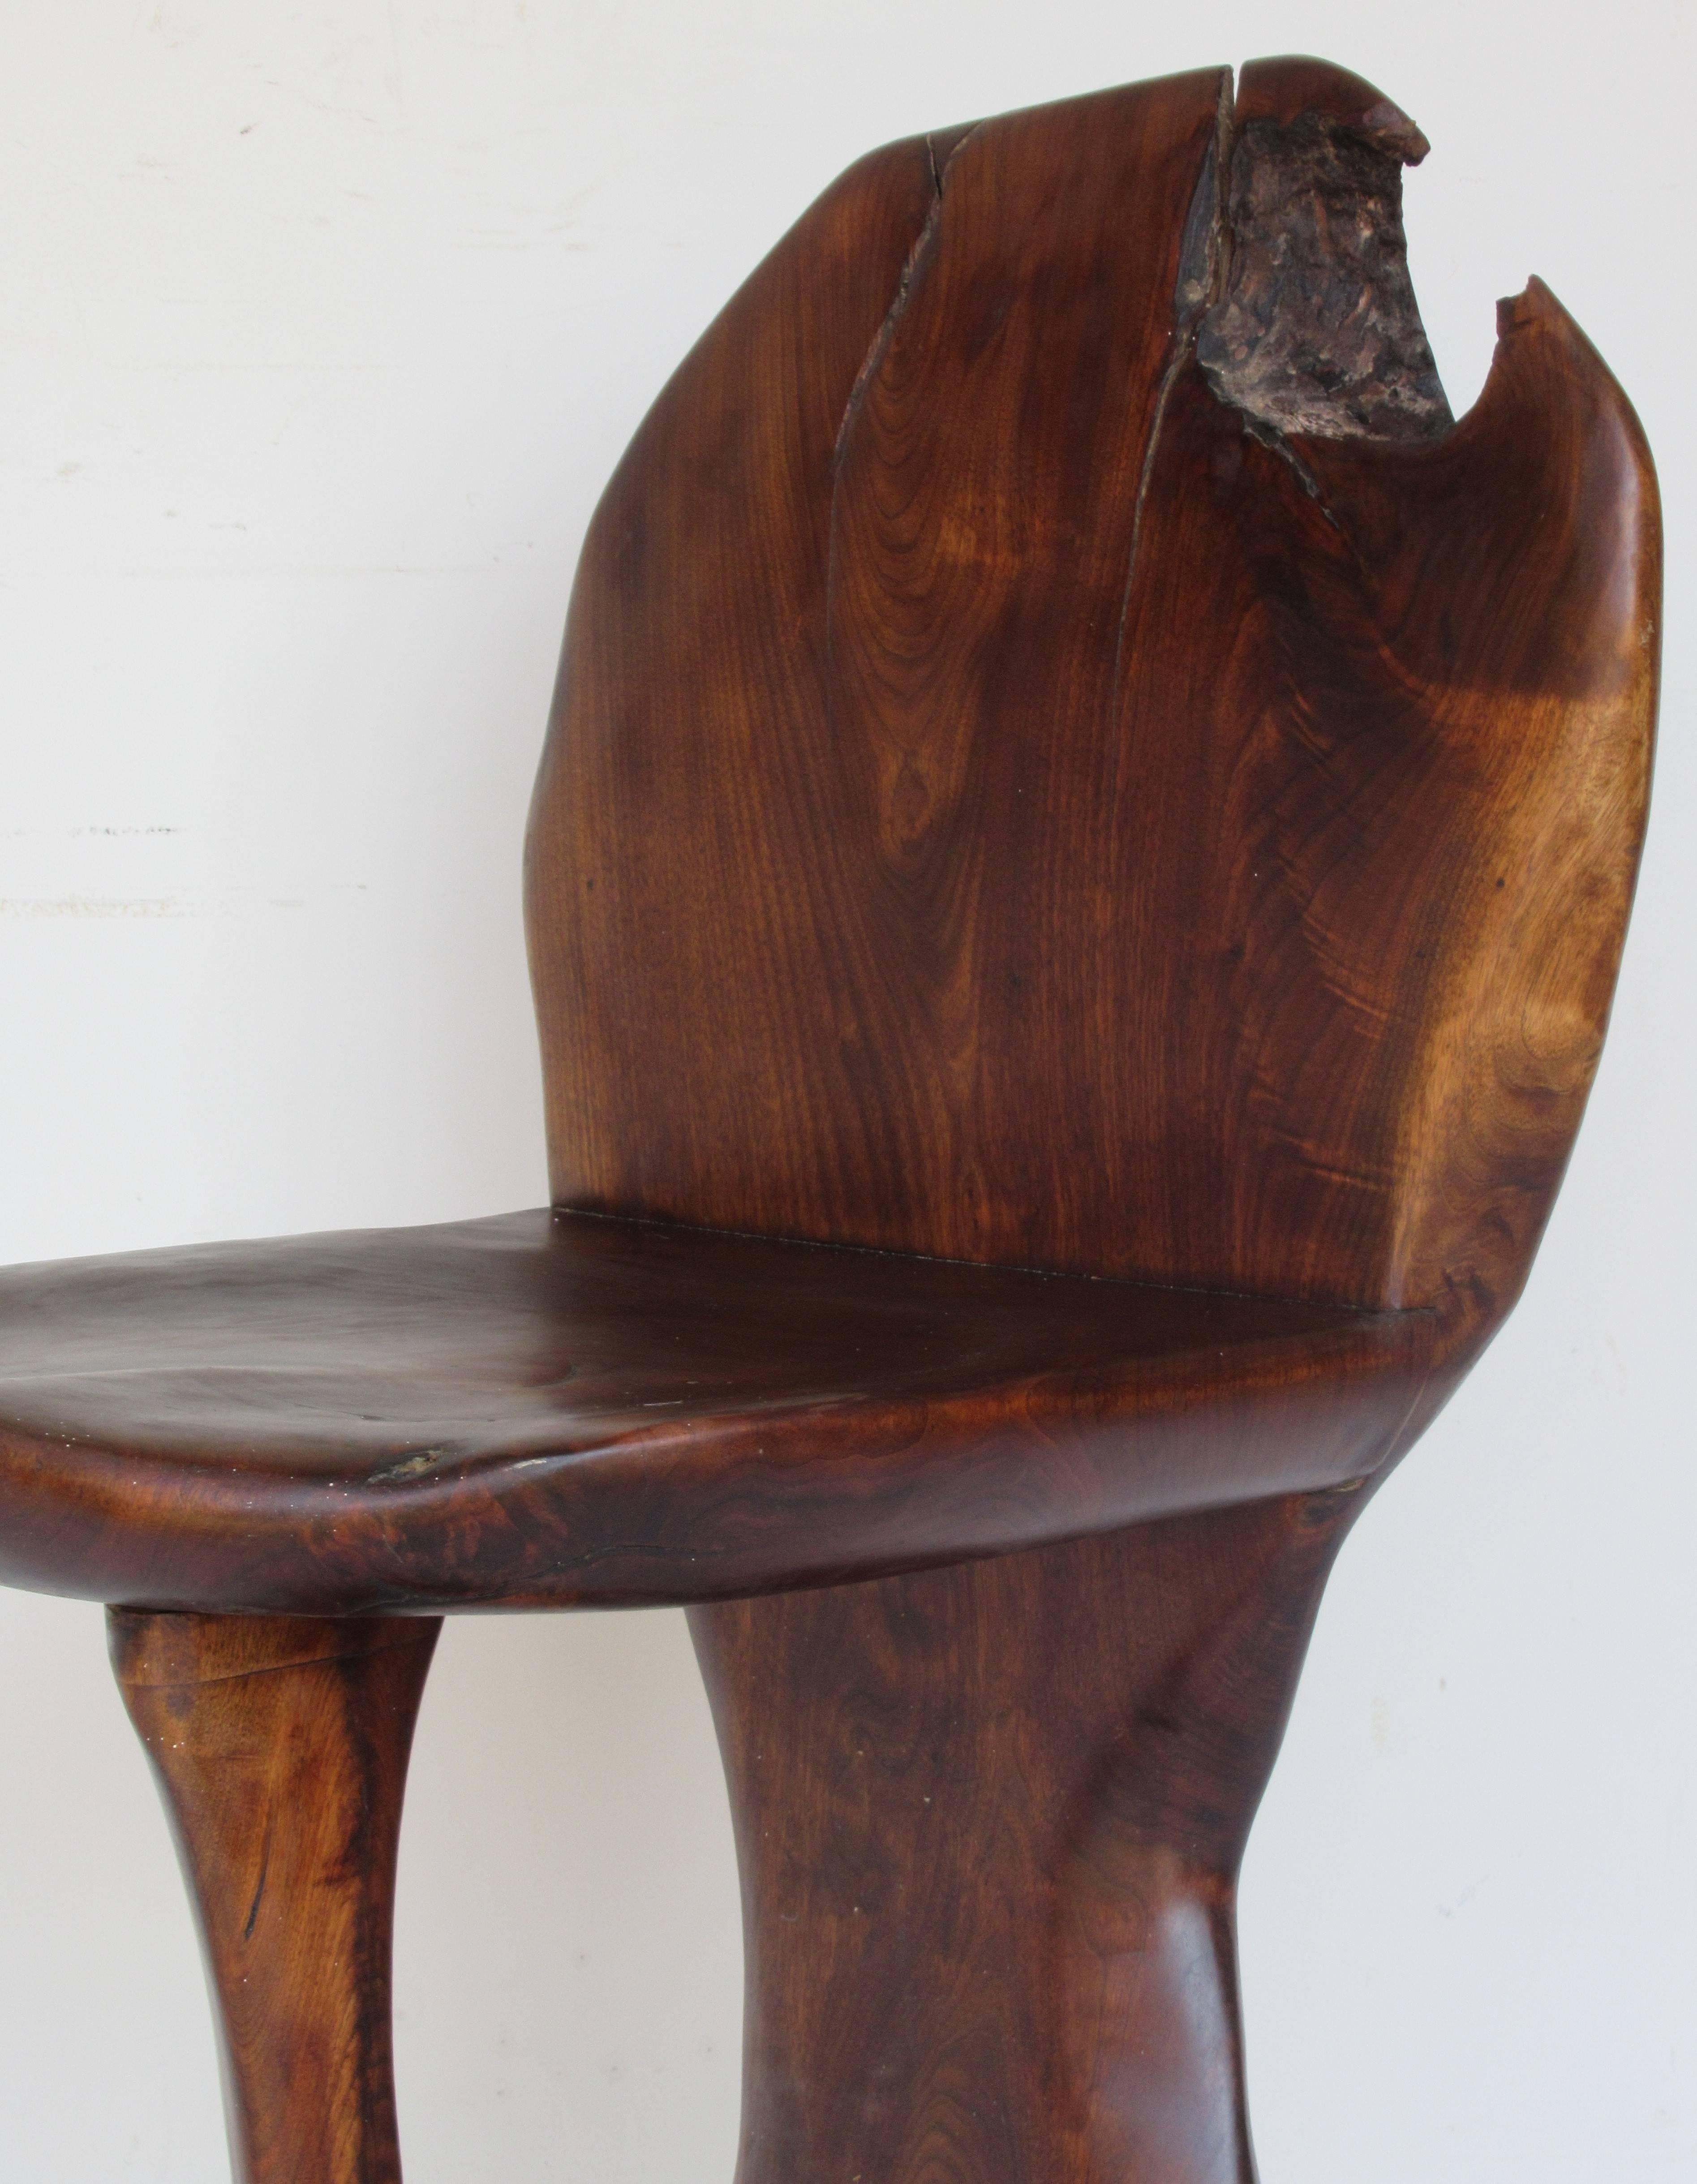 1970s American studio furniture Craft movement organic modern sculpture chair / stool in beautifully aged surface with a rich deep color patina to strongly figured black walnut. From Western NY state. Great looking chair. See all pictures.